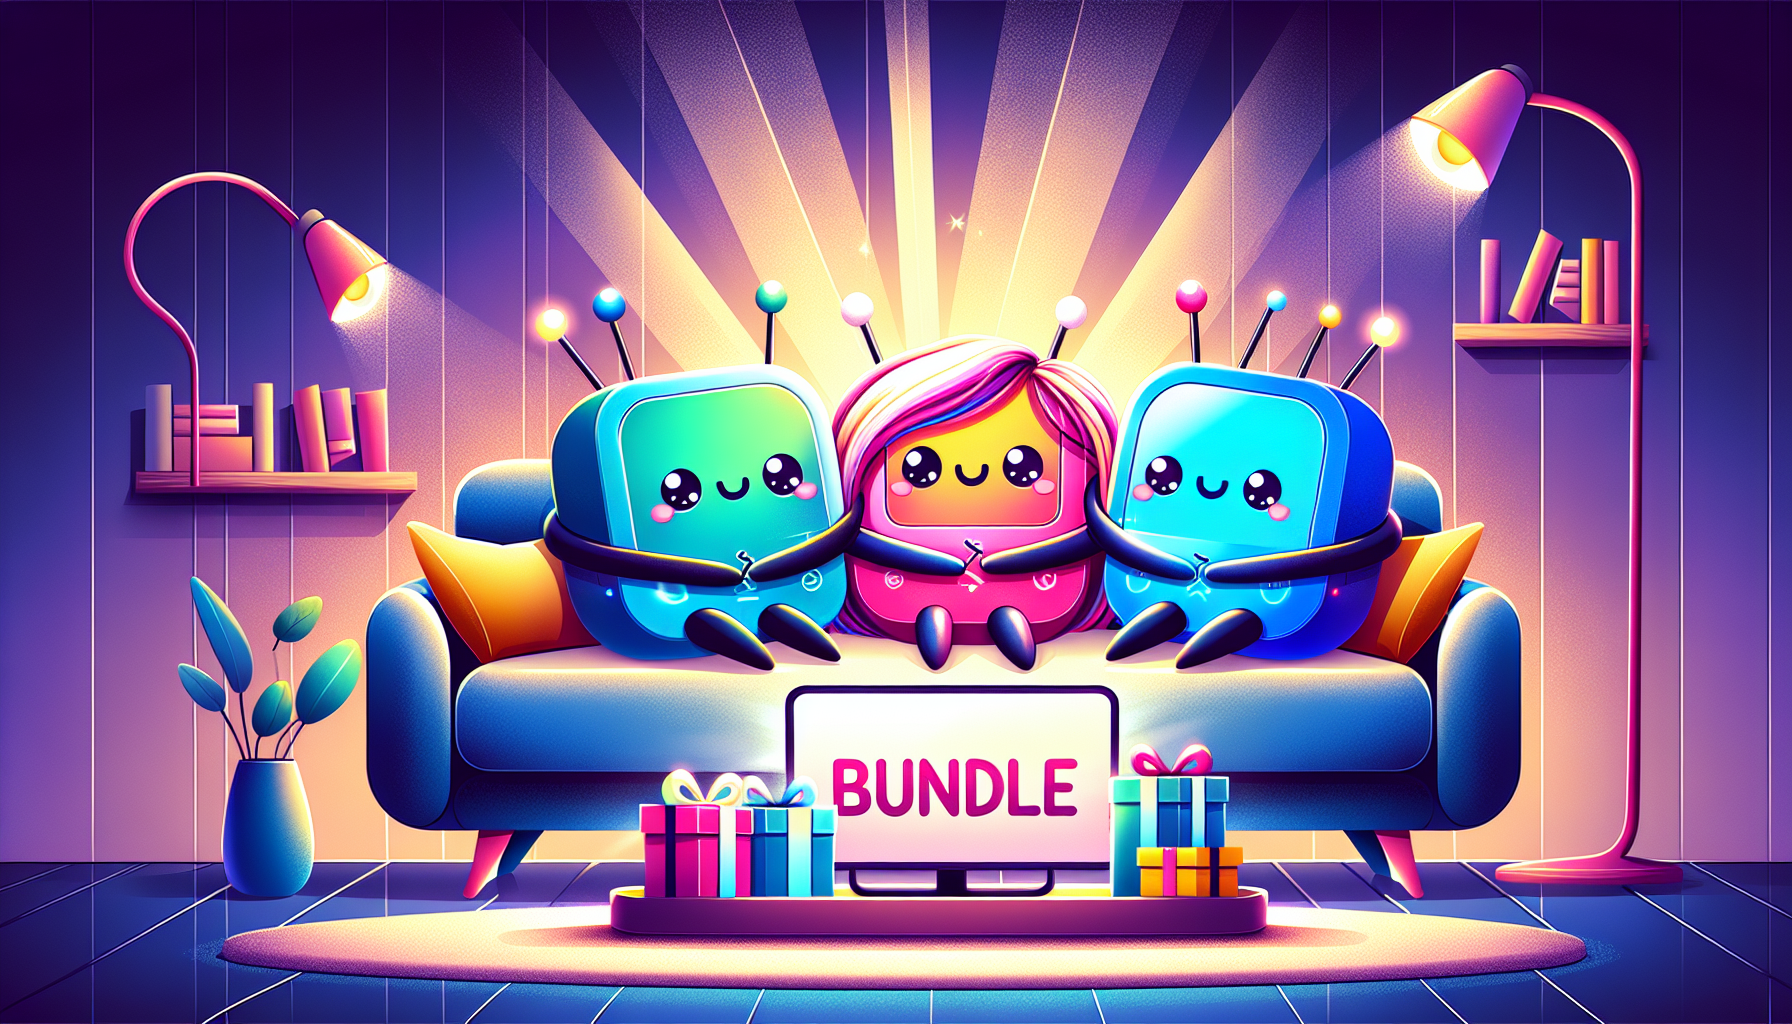 Three anthropomorphic devices representing Disney+, Hulu, and Max happily bundling together while sitting on a comfortable couch, in a cozy living room setting, with a remote on the side and a warm gl